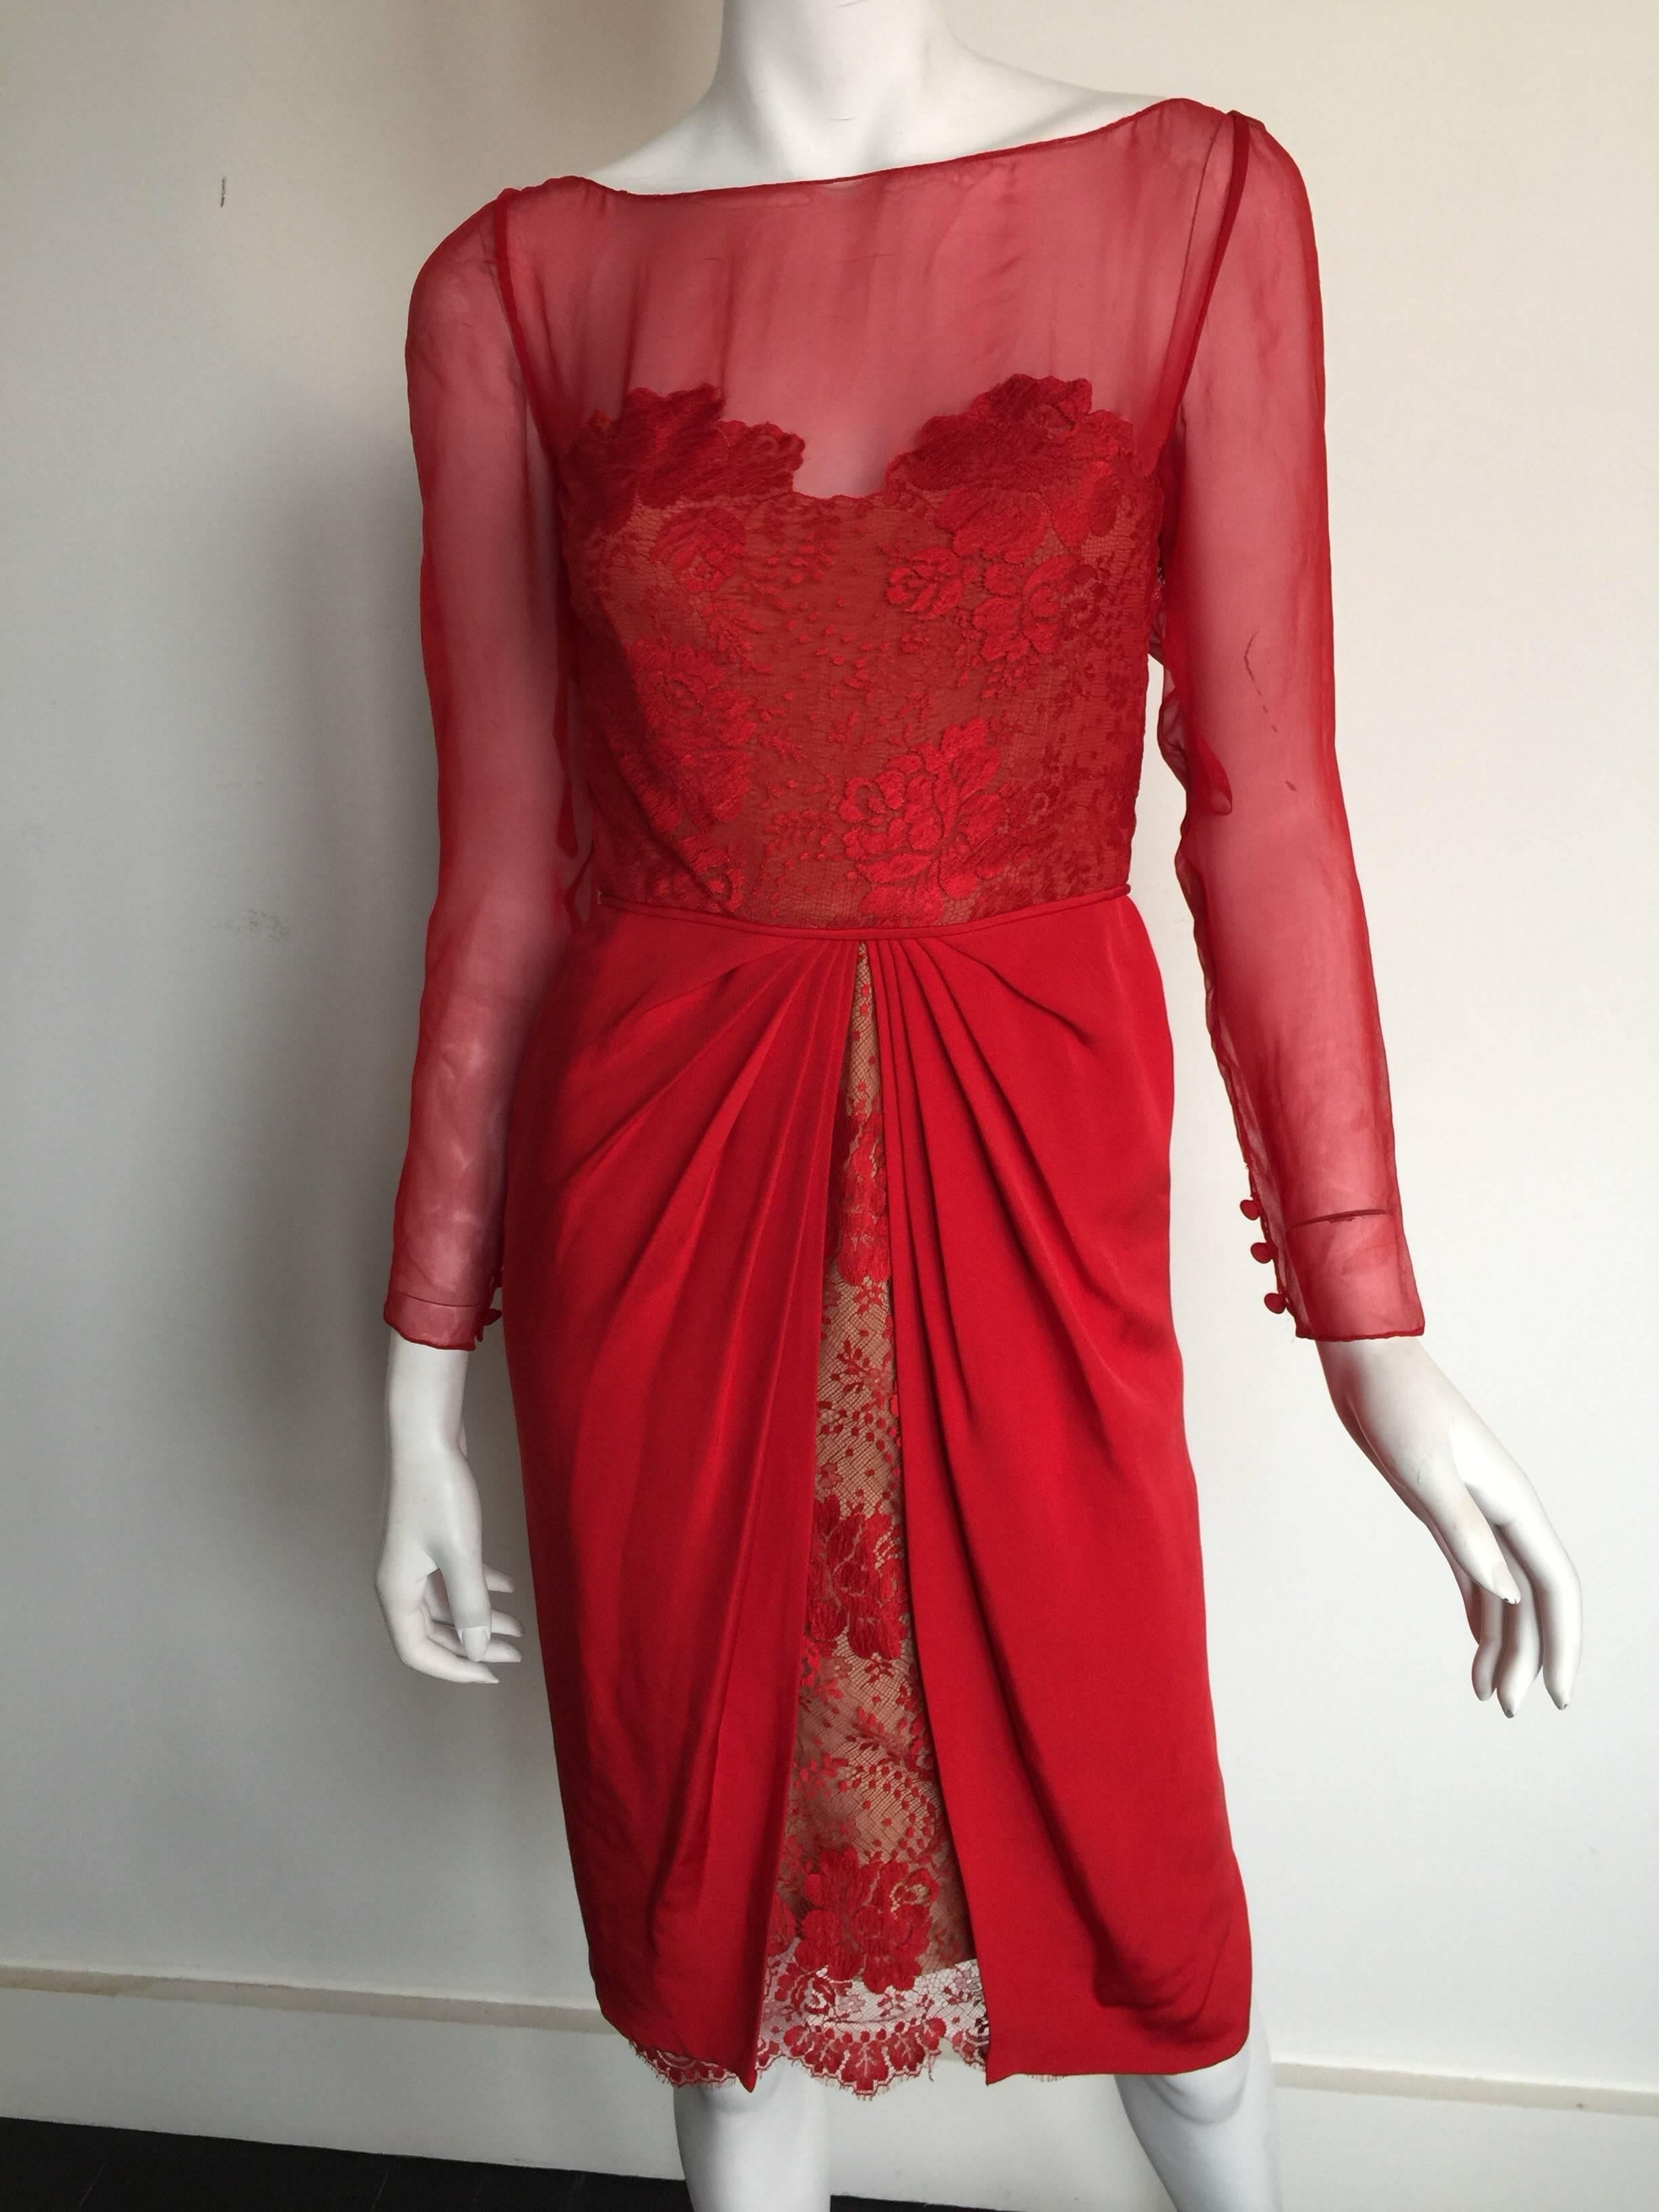 Stunning red silk, chiffon and lace overlay dress.  The neckline has a boatneck and there is a double zipper in the back as shown. 